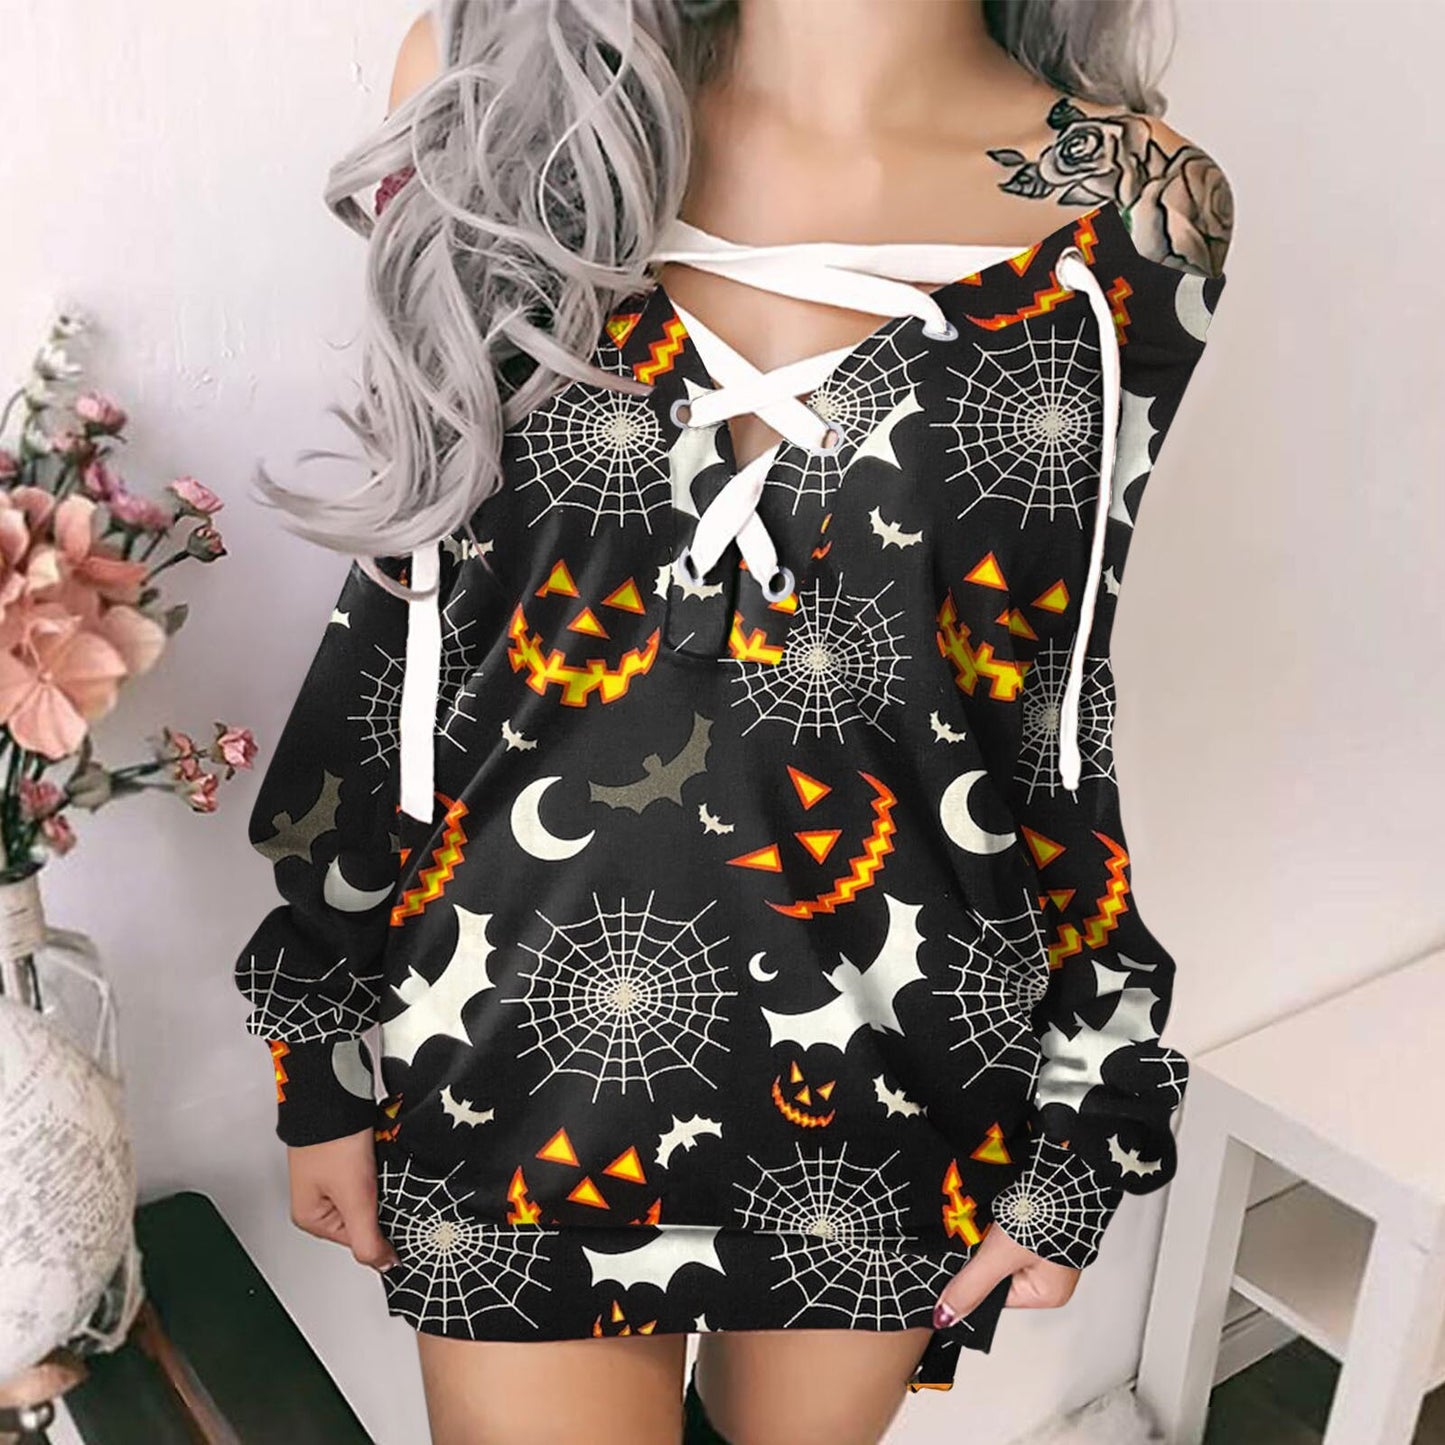 Halloween Dresses For Women Fashion Casual Prints Dress Off-shoulder Strappy Mini Dress Long Sleeves Vestidos Mujer Verano